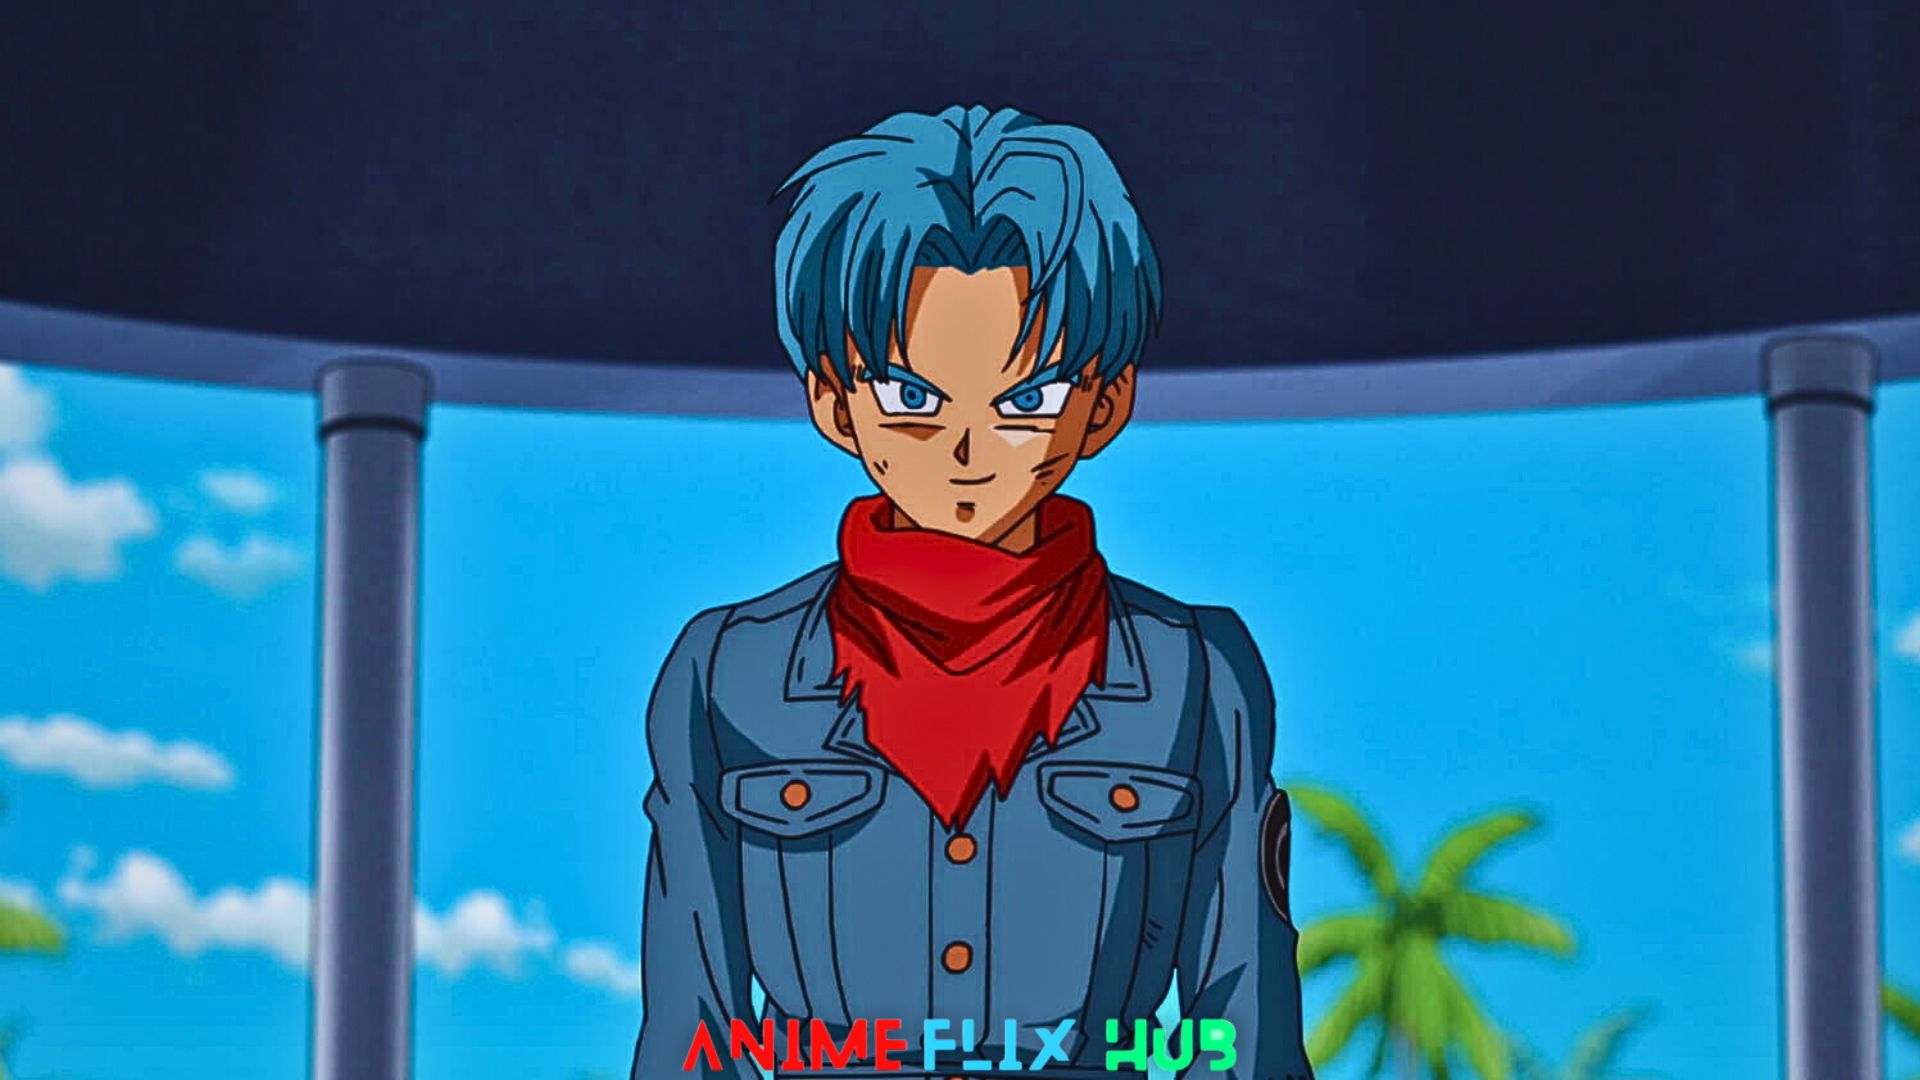 Future Trunks Time-Traveling to Alter the Present